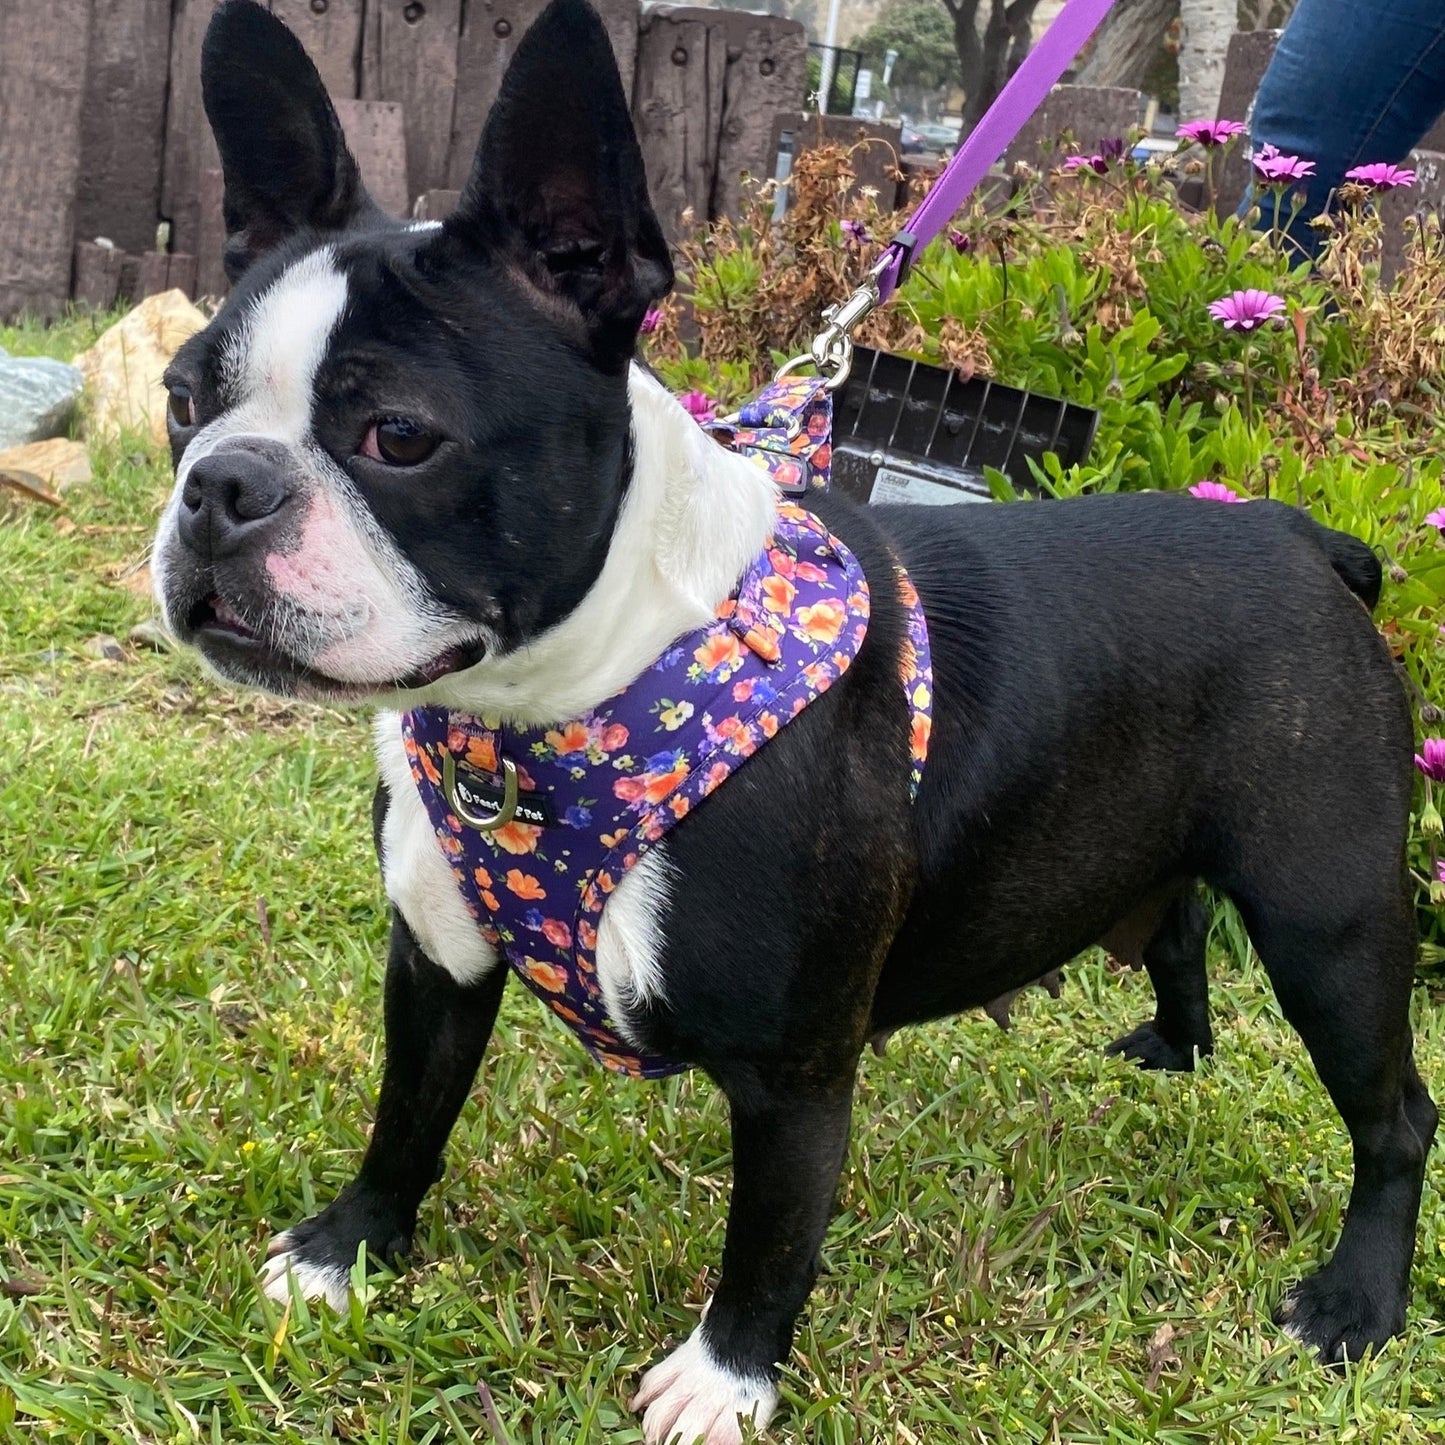 a photo of a black and white French bulldog standing on grass wearing a purple and orange floral escape proof dog harness for extra small medium dogs 